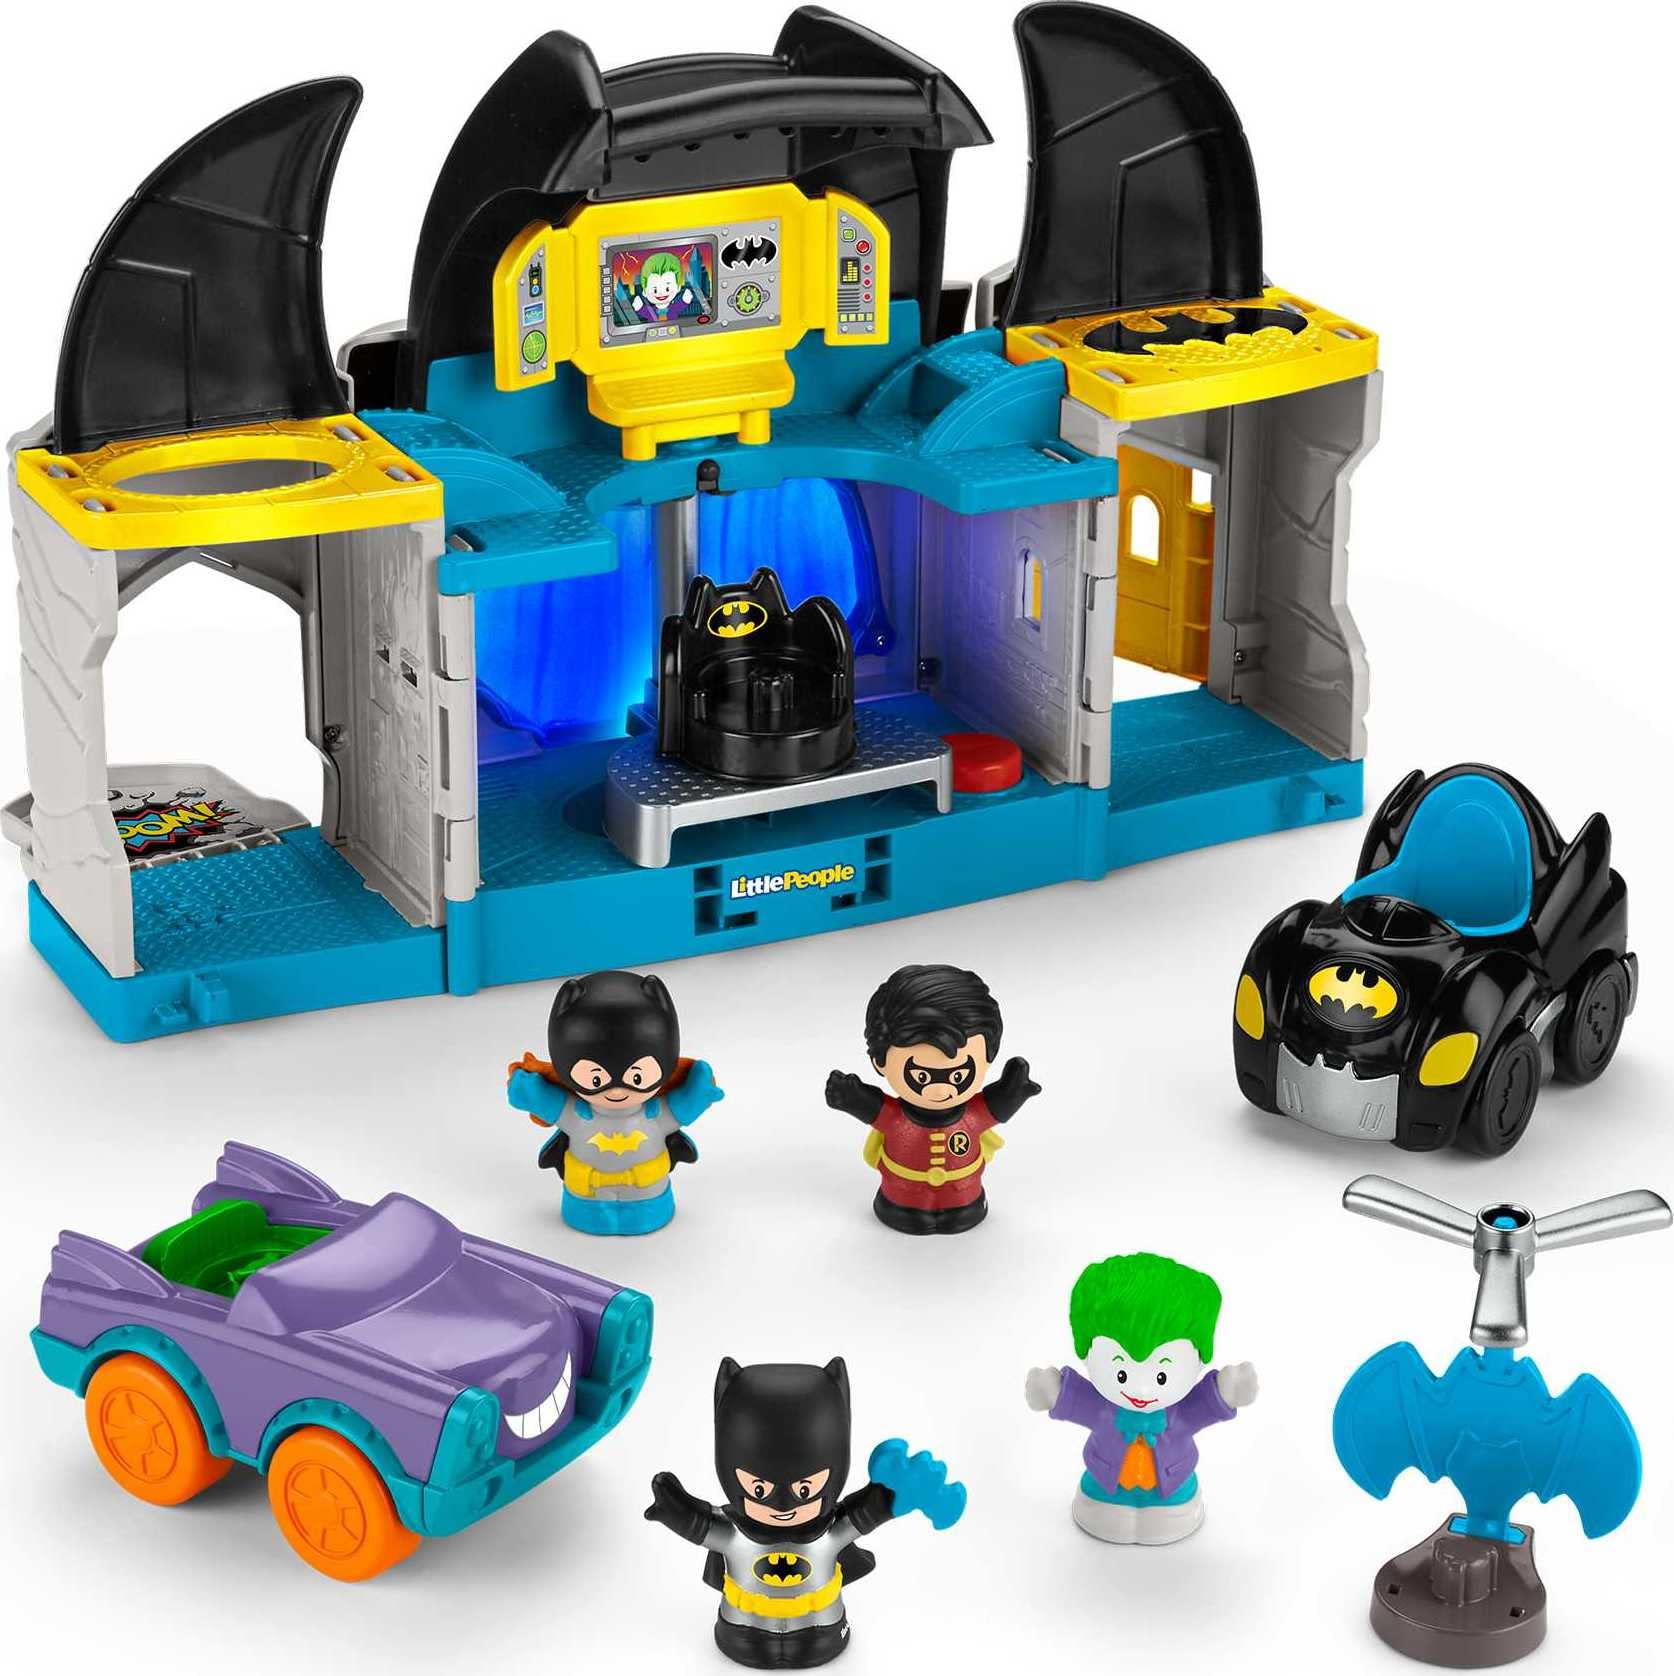 Fisher-Price Little People DC Super Friends Batman Toy Deluxe Batcave Playset